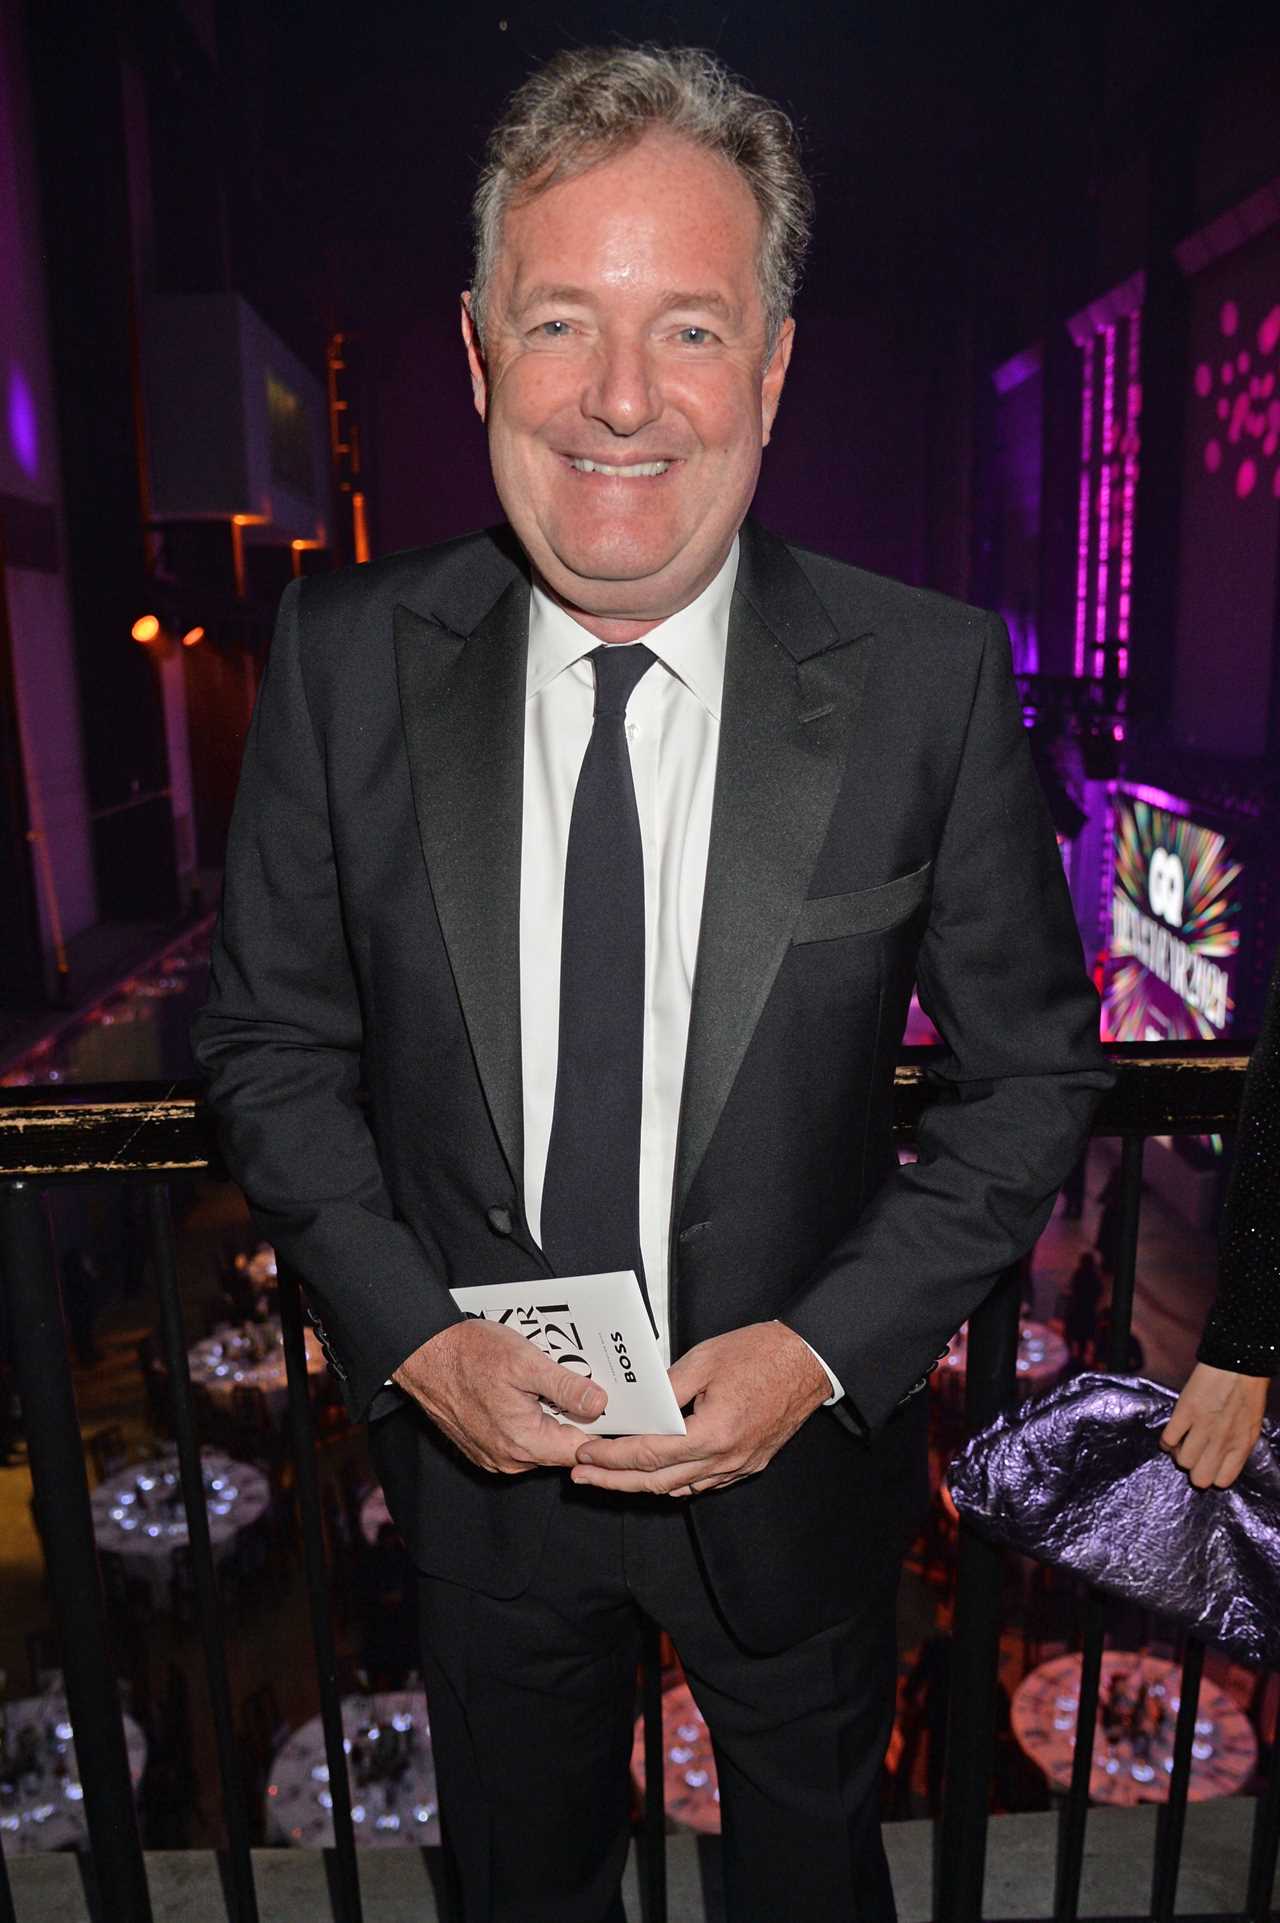 Piers Morgan reveals awkward meeting with Matt Hancock after ‘giving him a good kicking’ over I’m A Celebrity